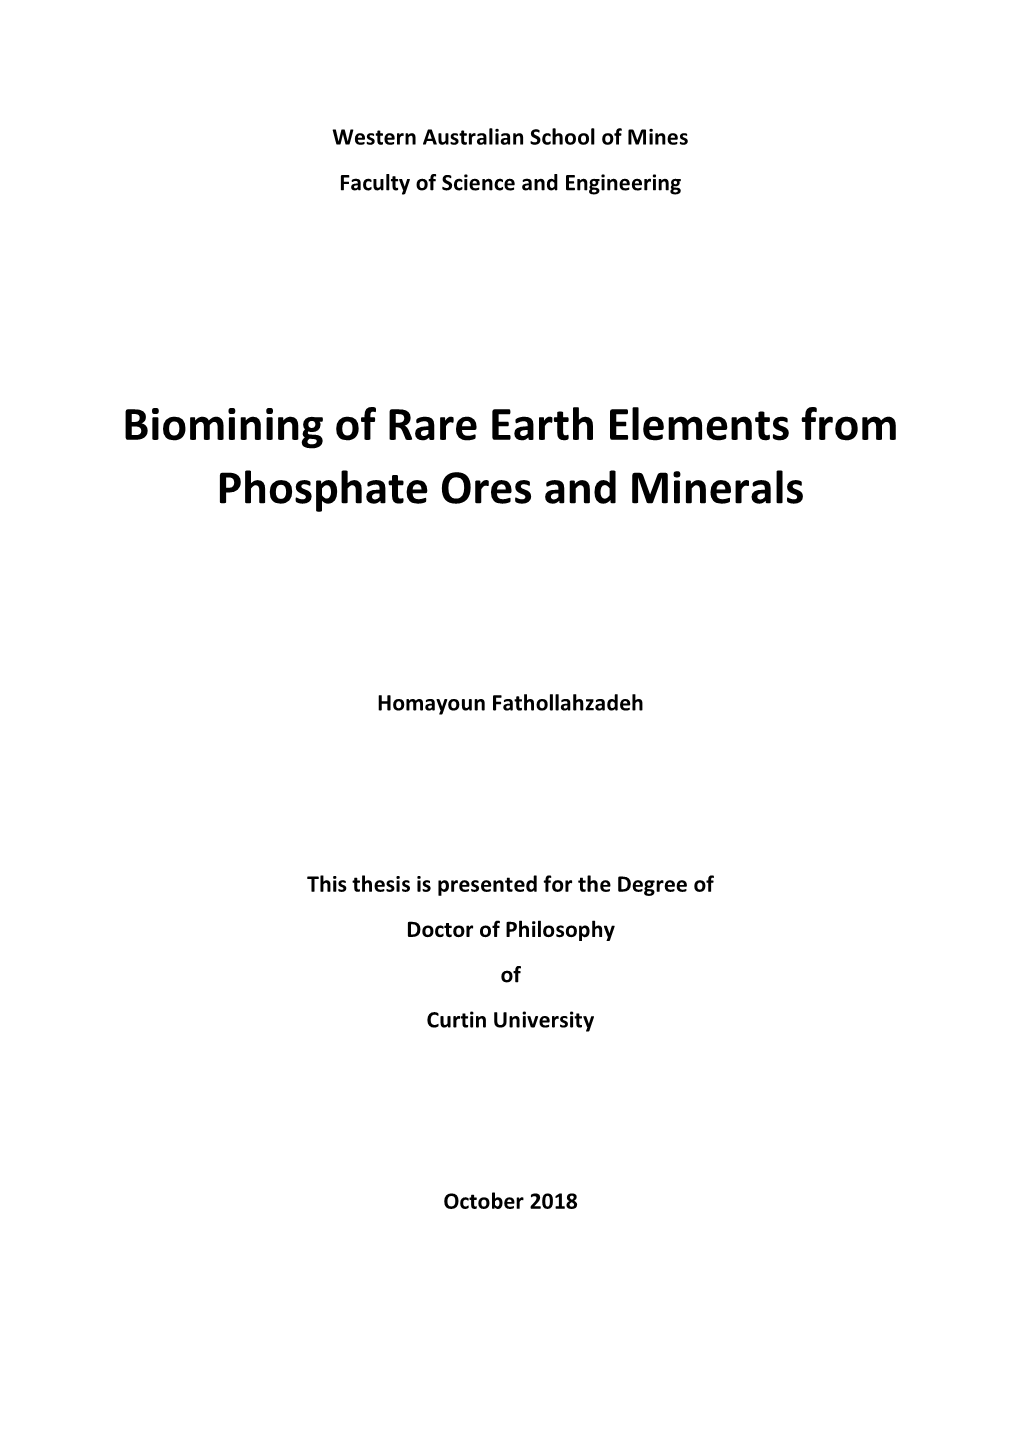 Biomining of Rare Earth Elements from Phosphate Ores and Minerals